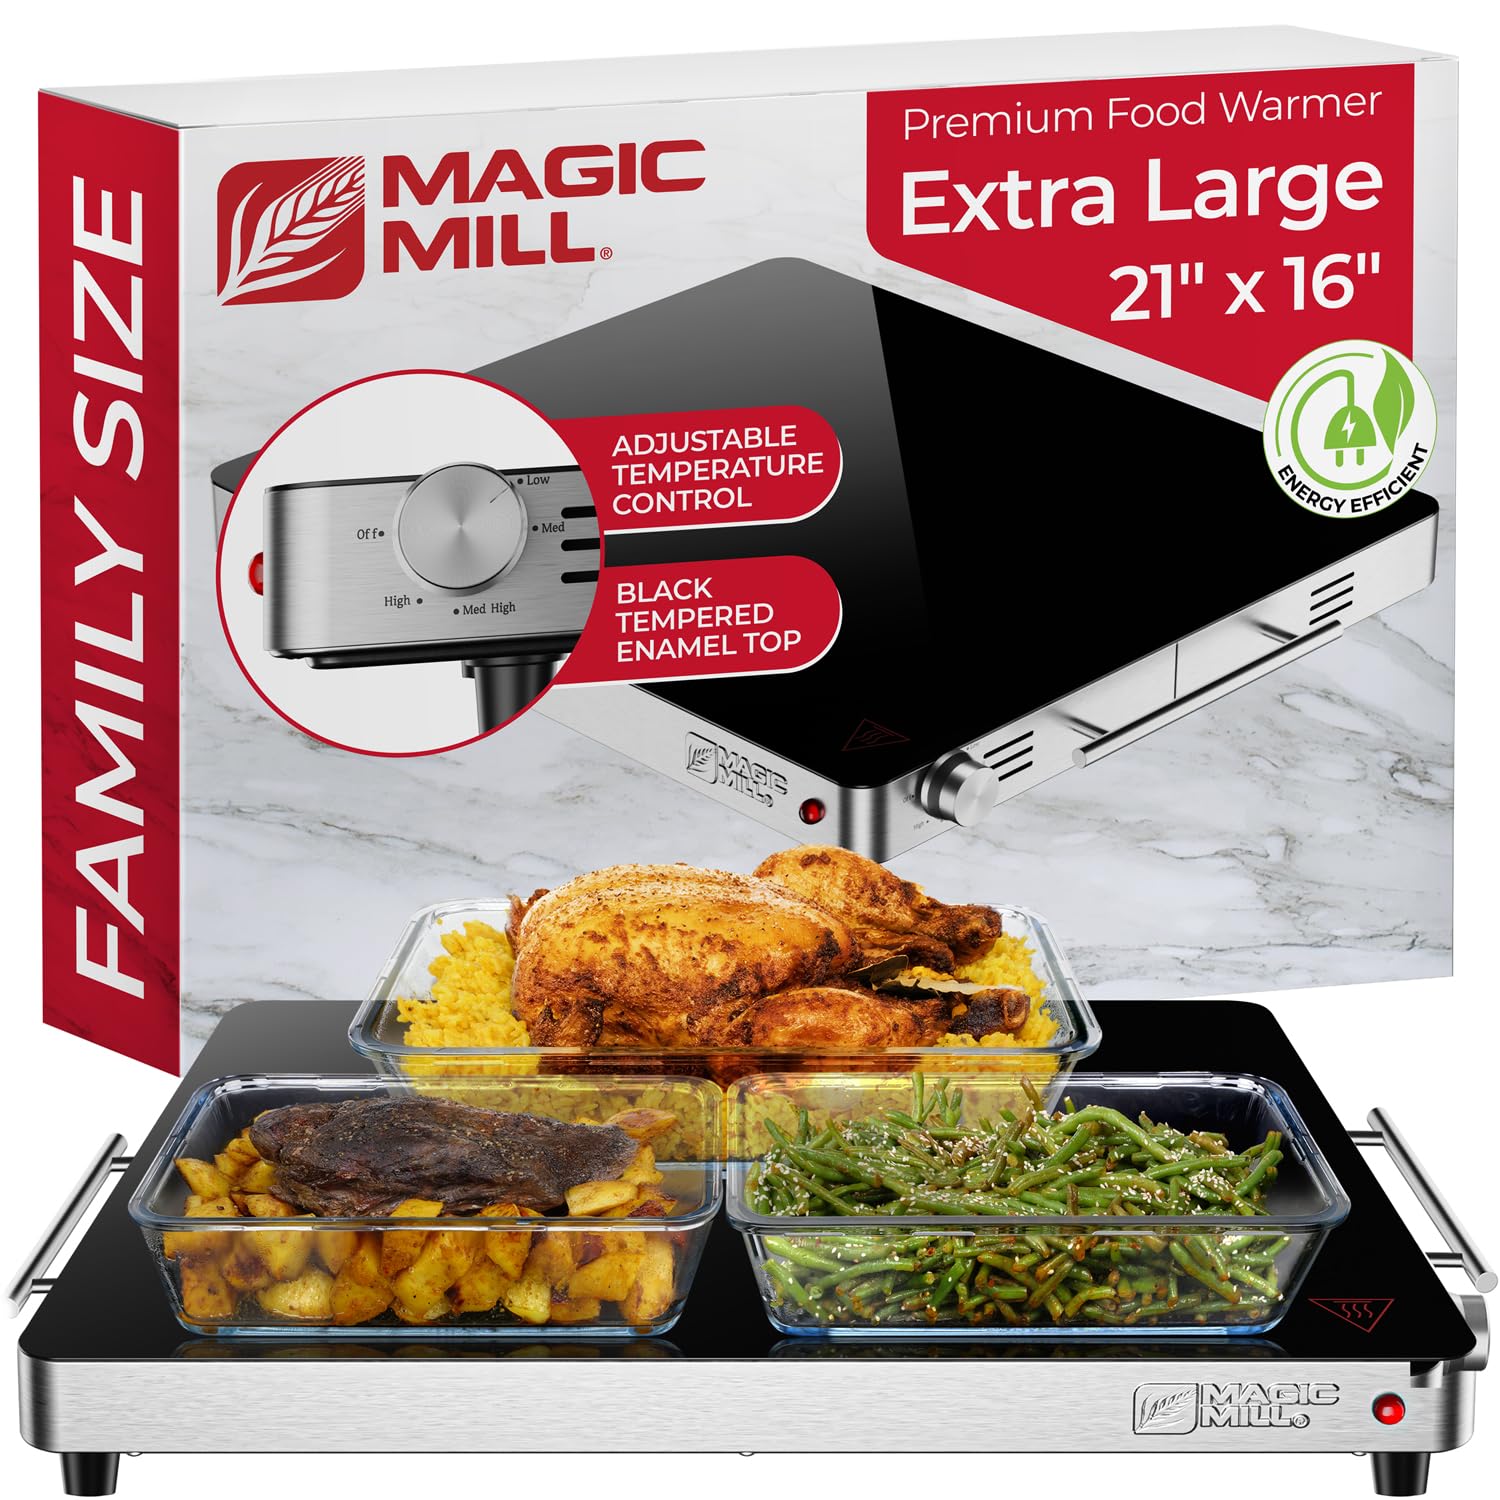 Magic Mill Extra Large Food Warmer for Parties | Electric Server Warming Tray, Hot Plate, with Adjustable Temperature Control, for Buffets, Restaurants, House Parties, Party Events (21" x 16")  - Like New